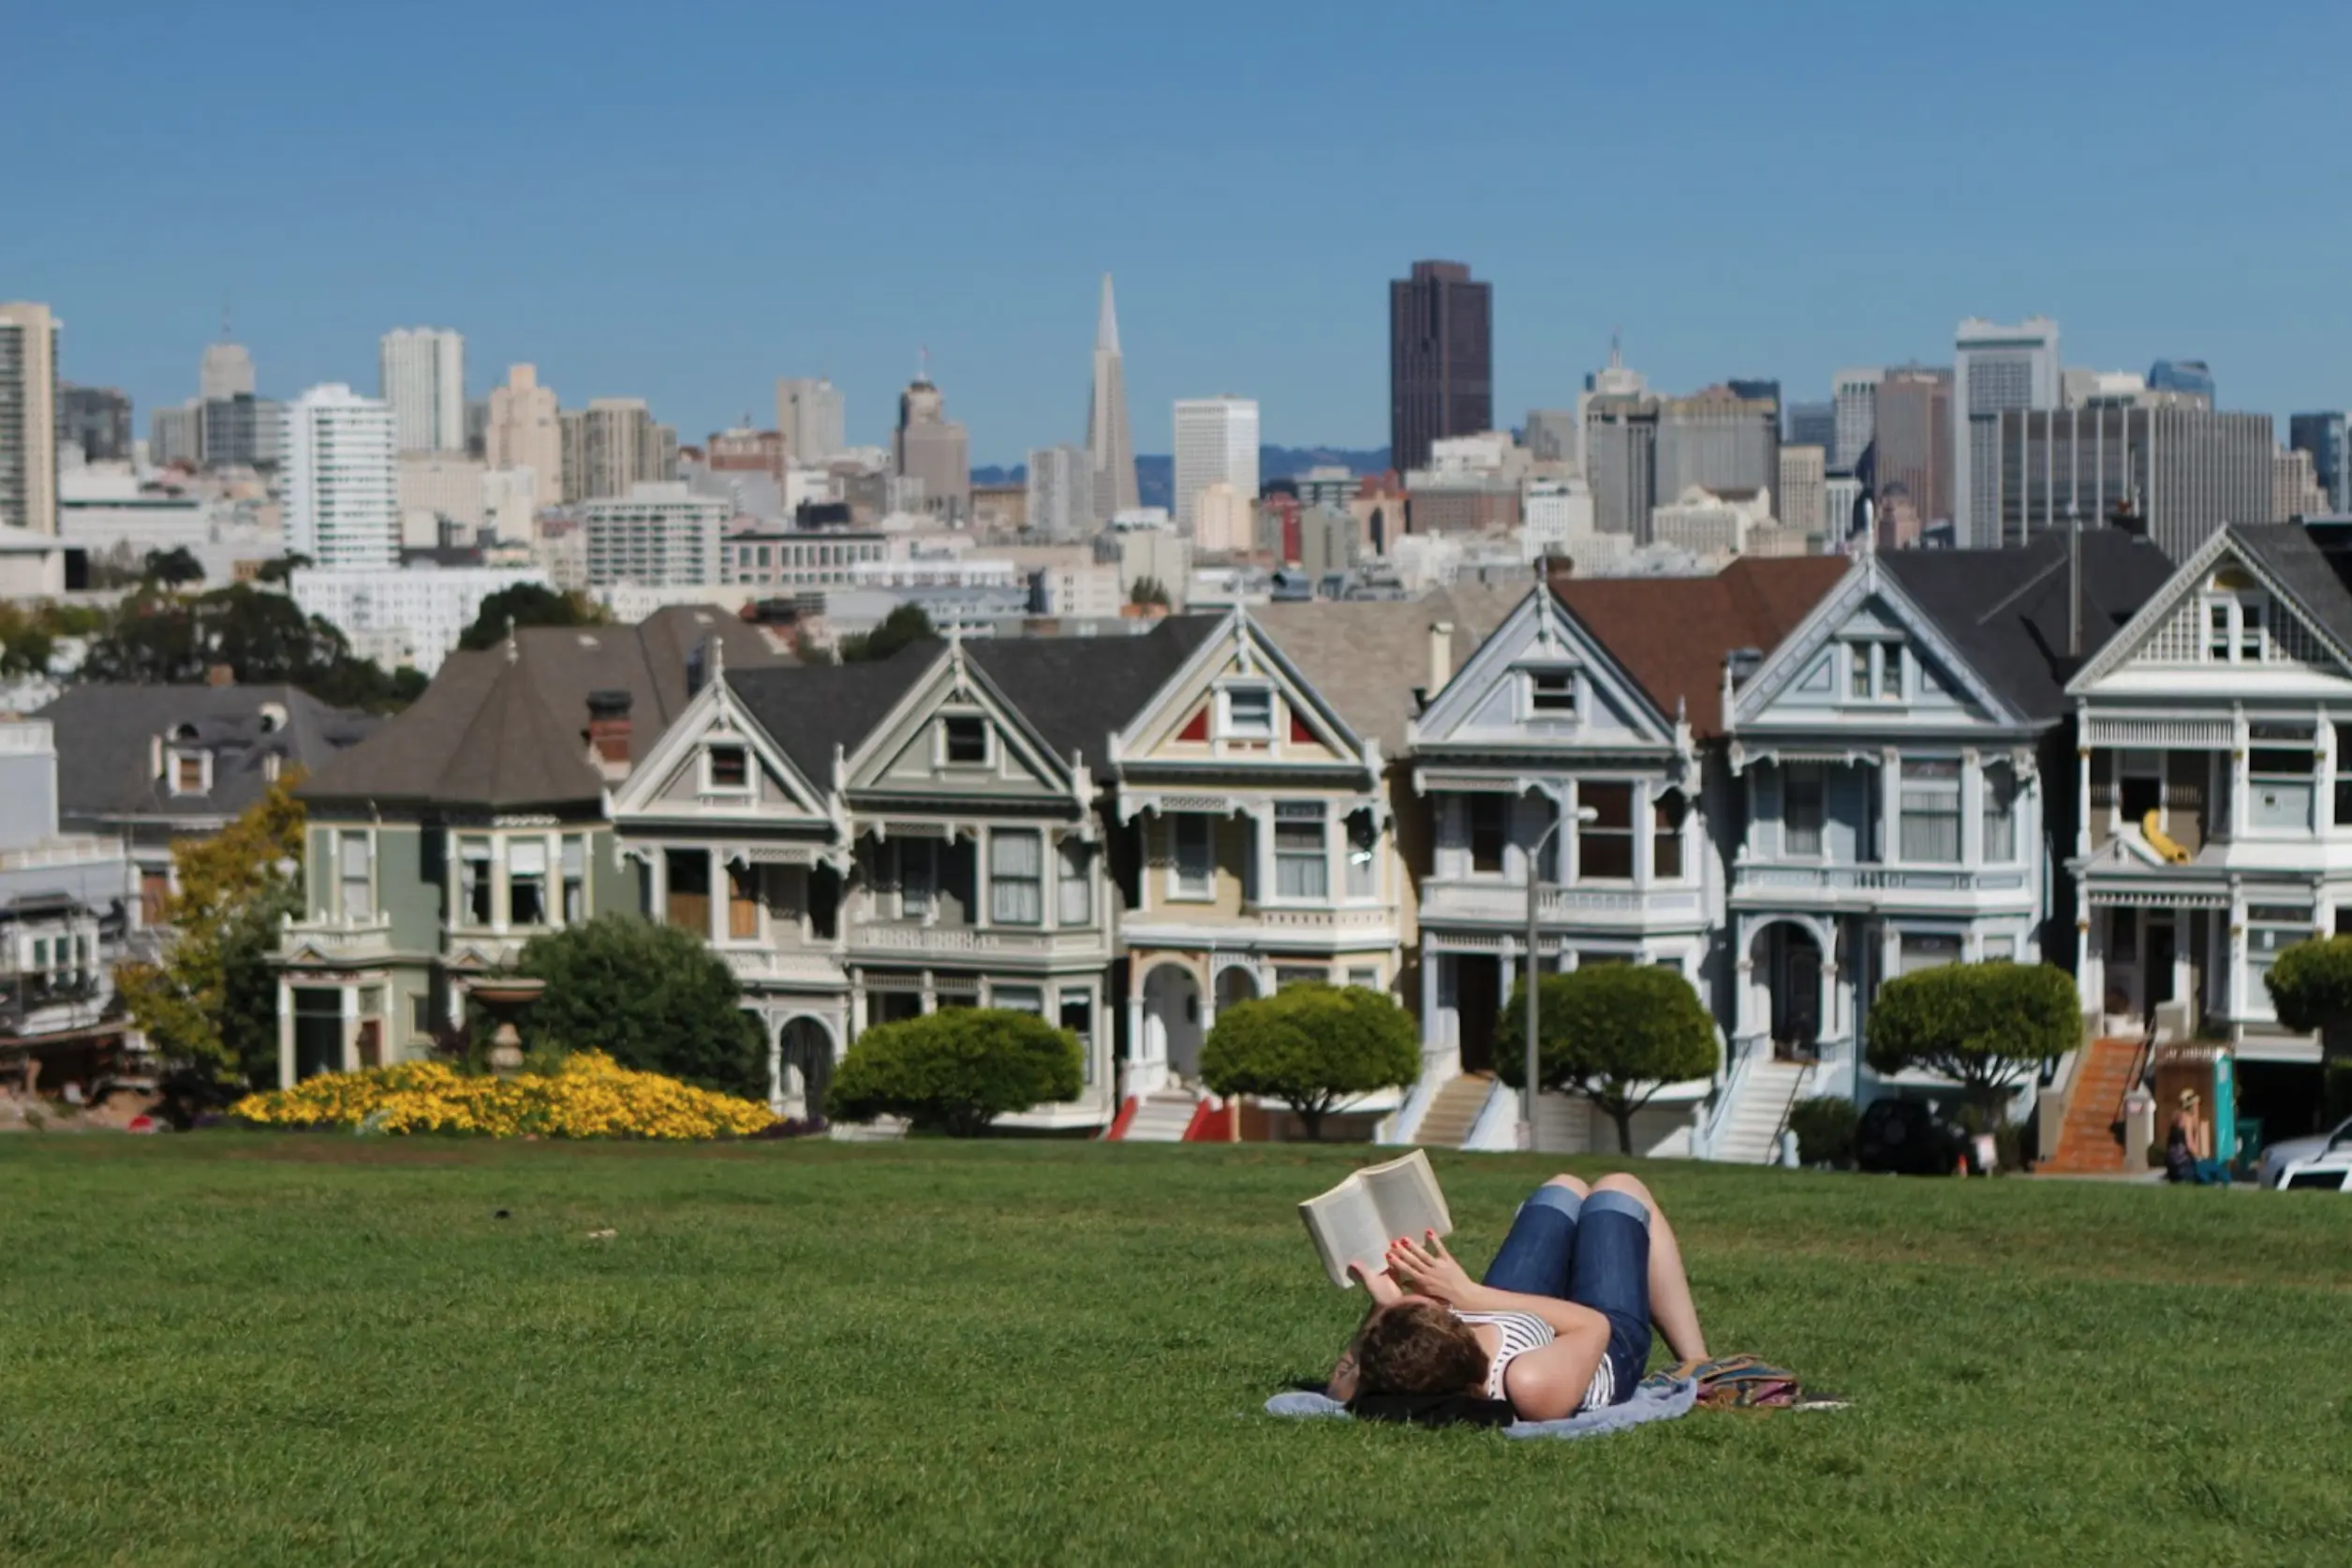 Should you self-manage your San Francisco rental home? Here are some important considerations before deciding